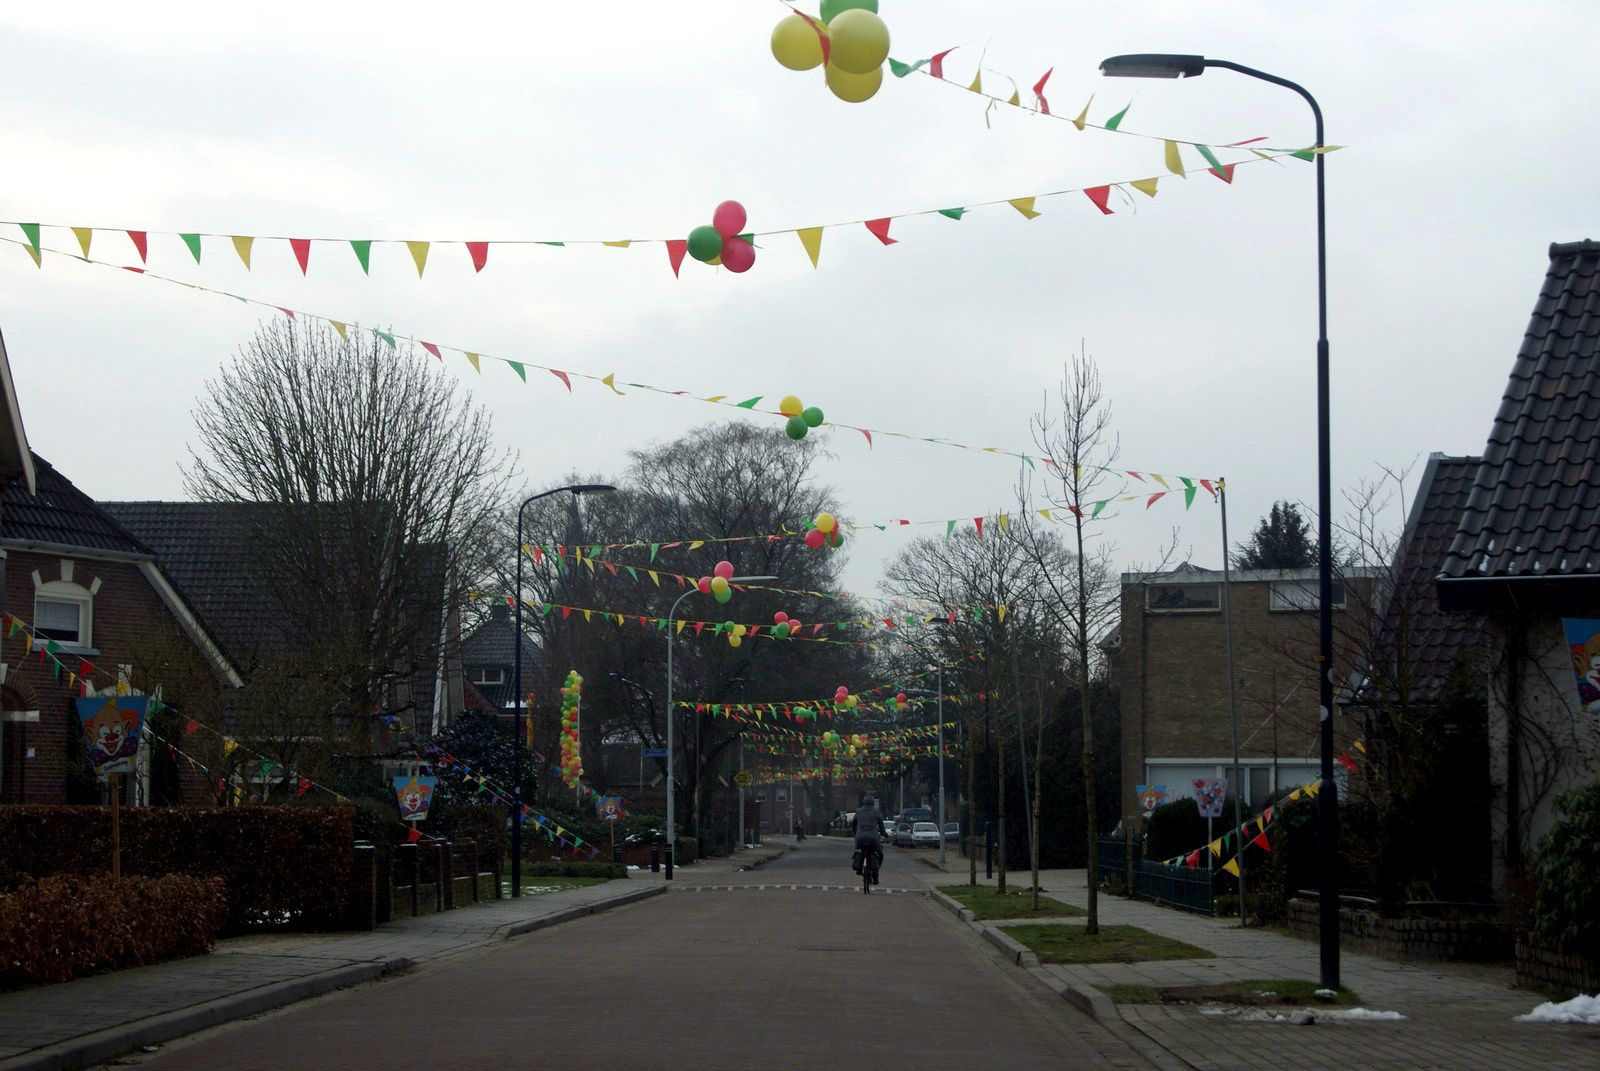 14.2, Today..they are celebrating Carnival in the Dutch neighborhoods.